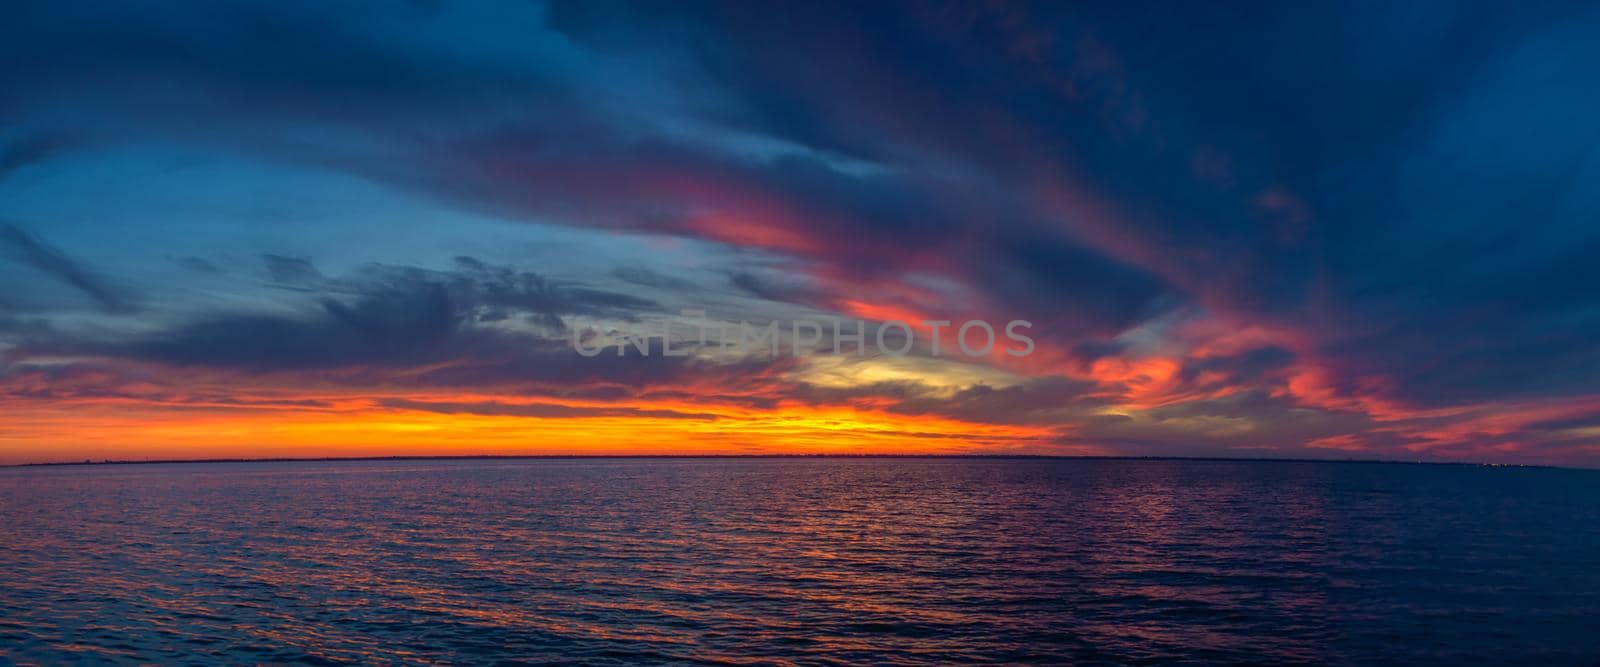 Beautiful sunset over the water surface by Multipedia